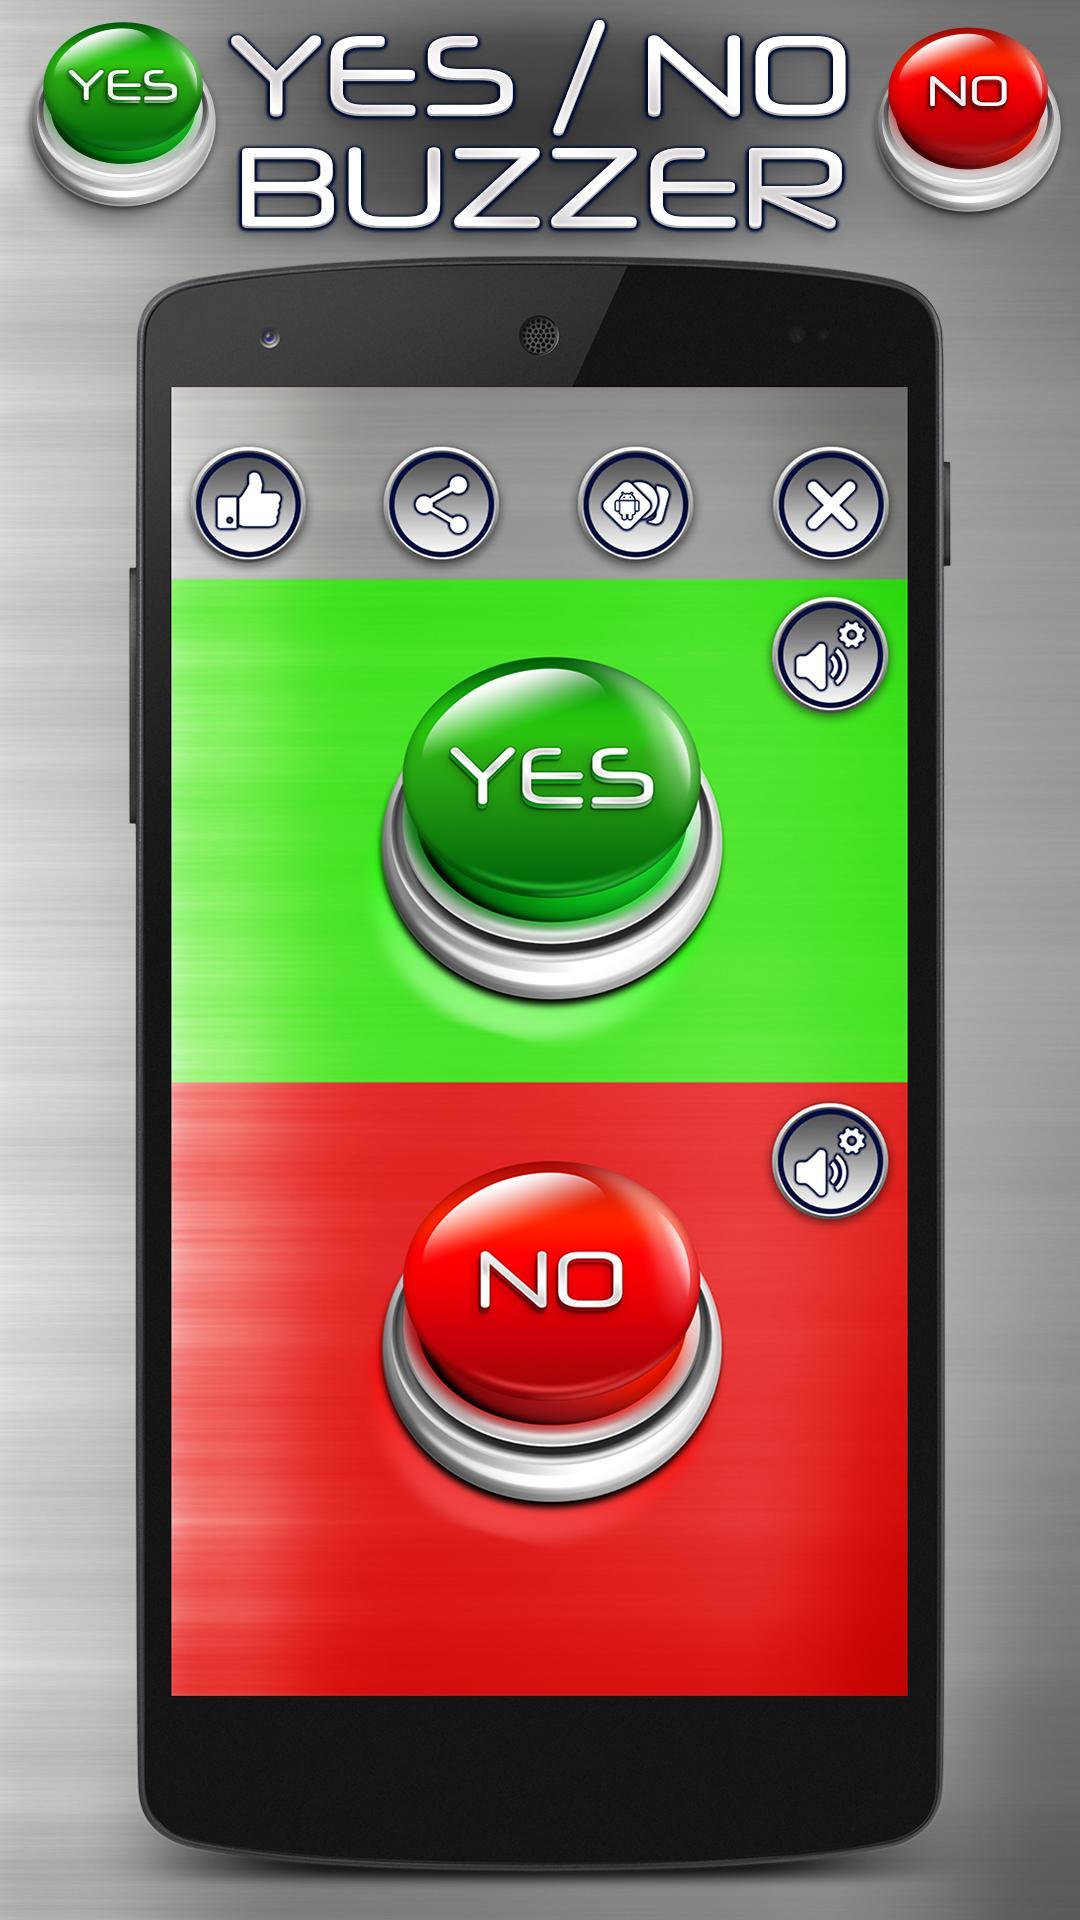 Yes No Voice Vote Buzzer for Android - APK Download